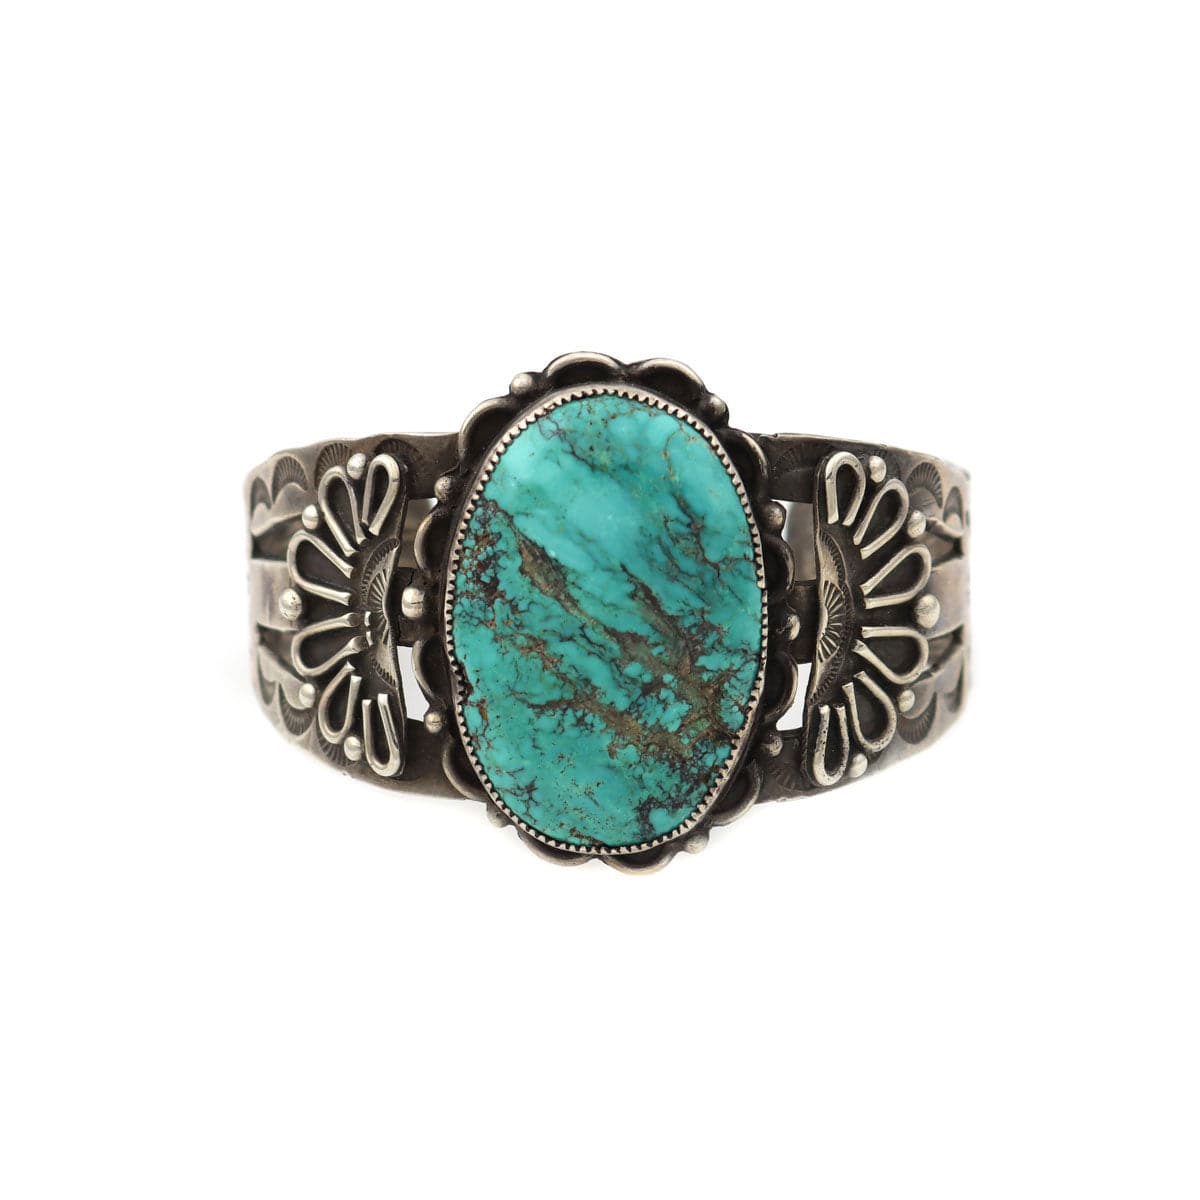 Navajo Turquoise and Silver Bracelet c. 1930s, size 6.75 (J14013-CO)